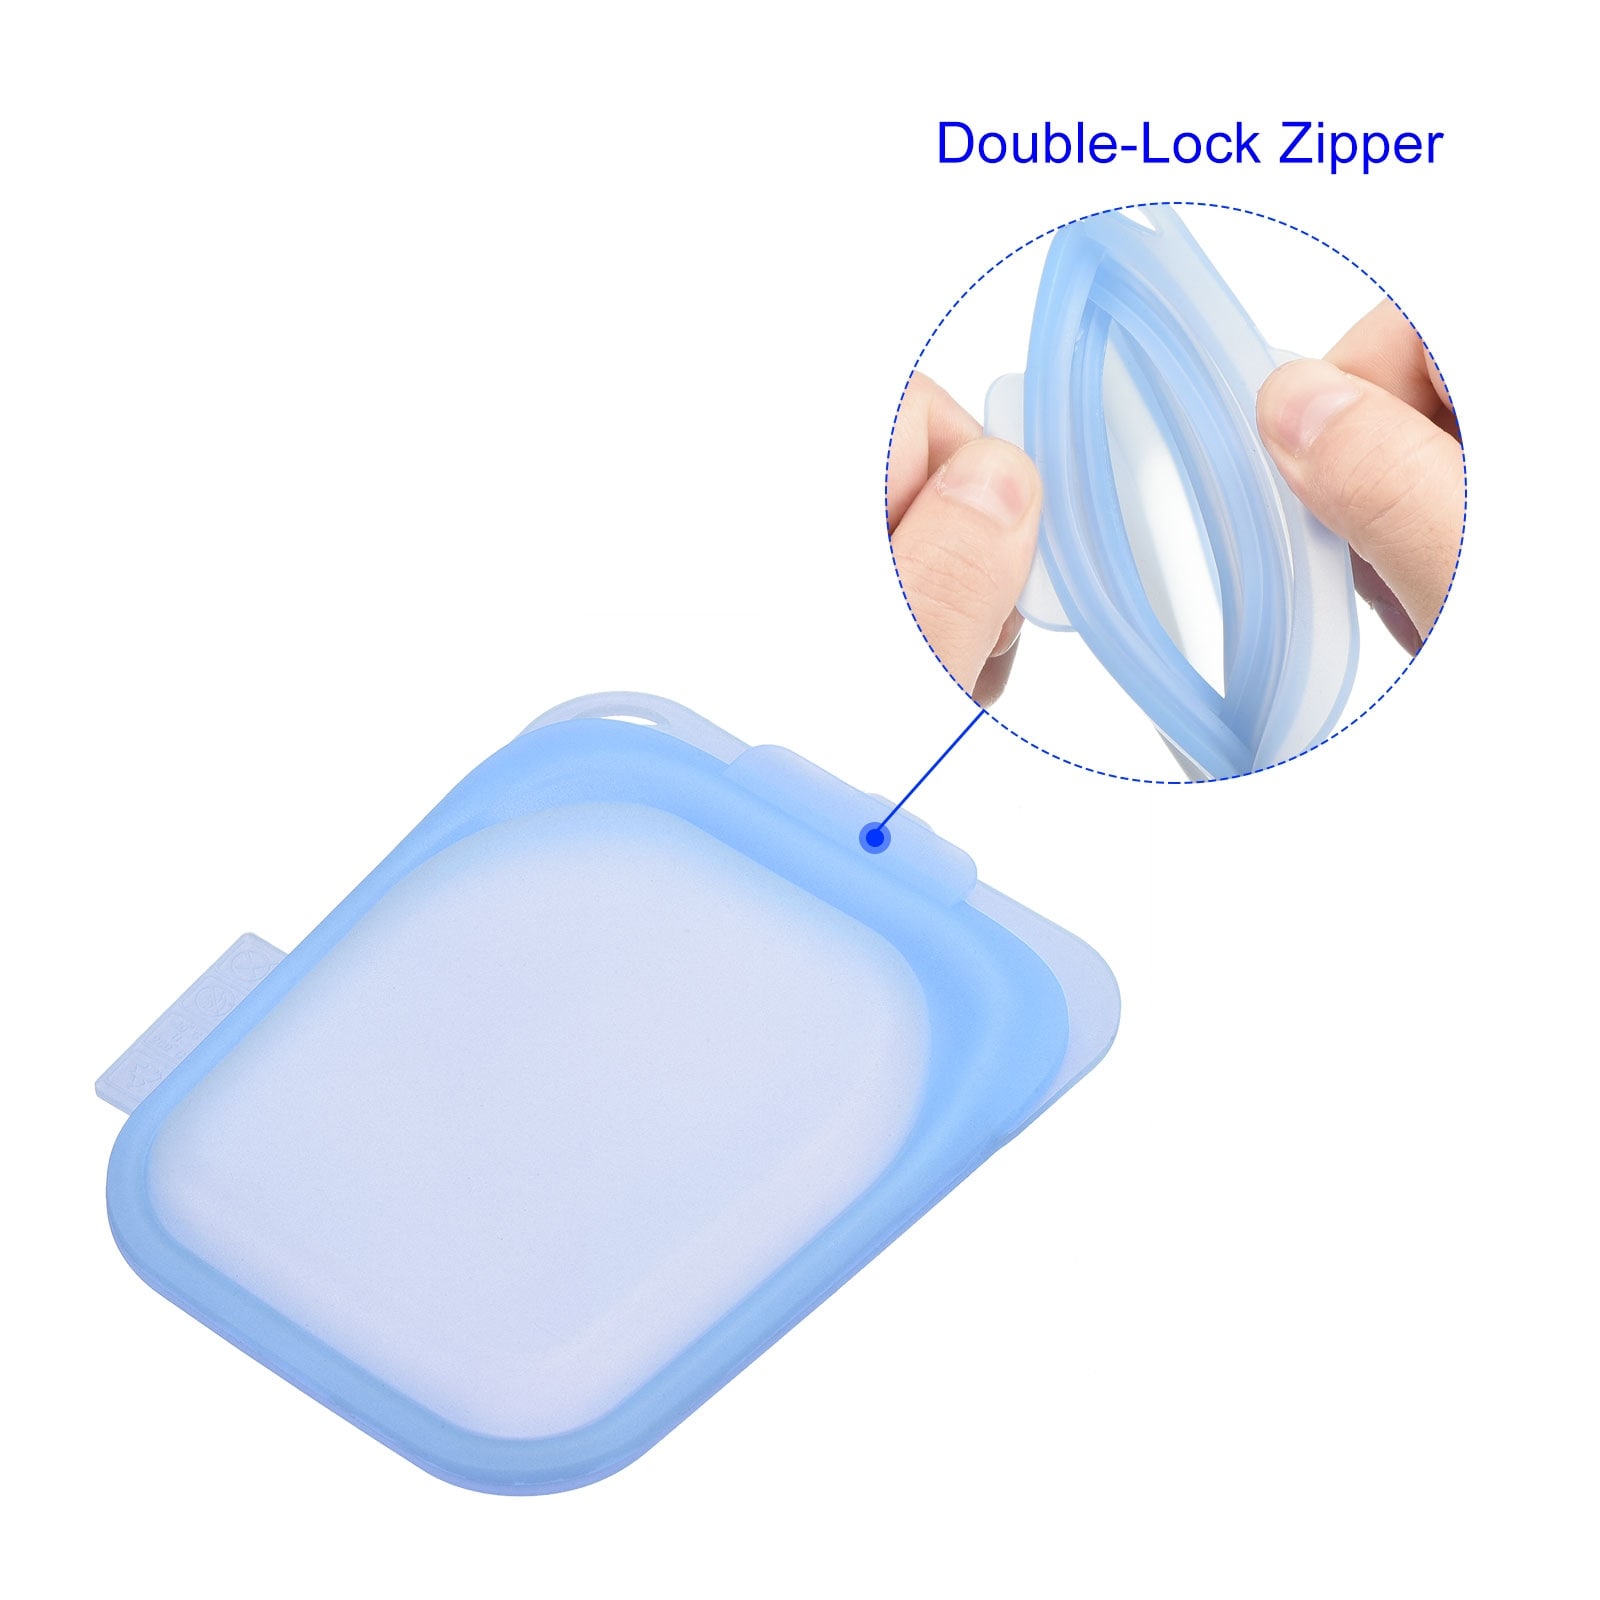 https://ak1.ostkcdn.com/images/products/is/images/direct/285e7cf81f9bd578ba4d866b50536461553017a4/Reusable-Food-Storage-Bags-Silicone-Freezer-Bags-Seal-Pouch-Bags-Blue-Small.jpg